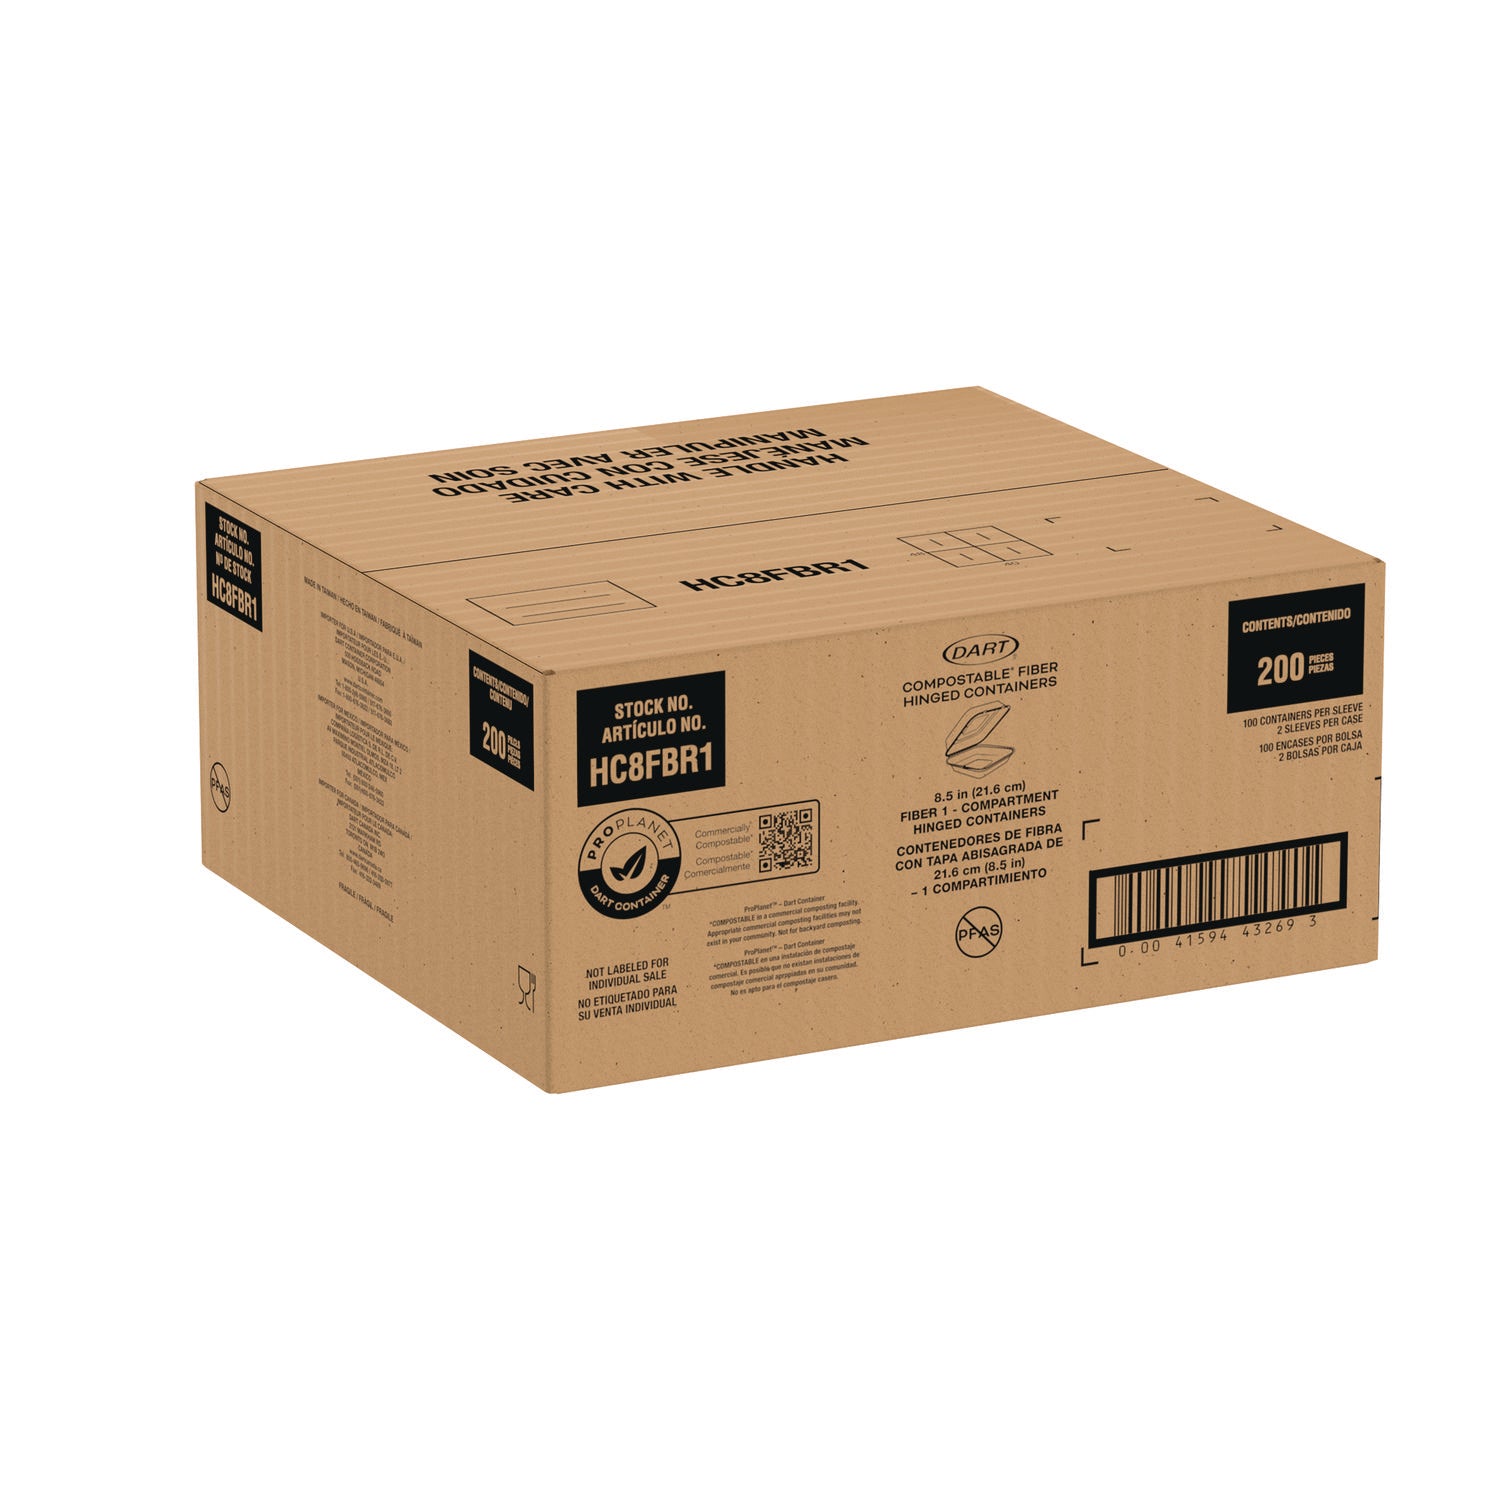 compostable-fiber-hinged-trays-proplanet-seal-803-x-838-x-193-ivory-molded-fiber-200-carton_dcchc8fbr1 - 3